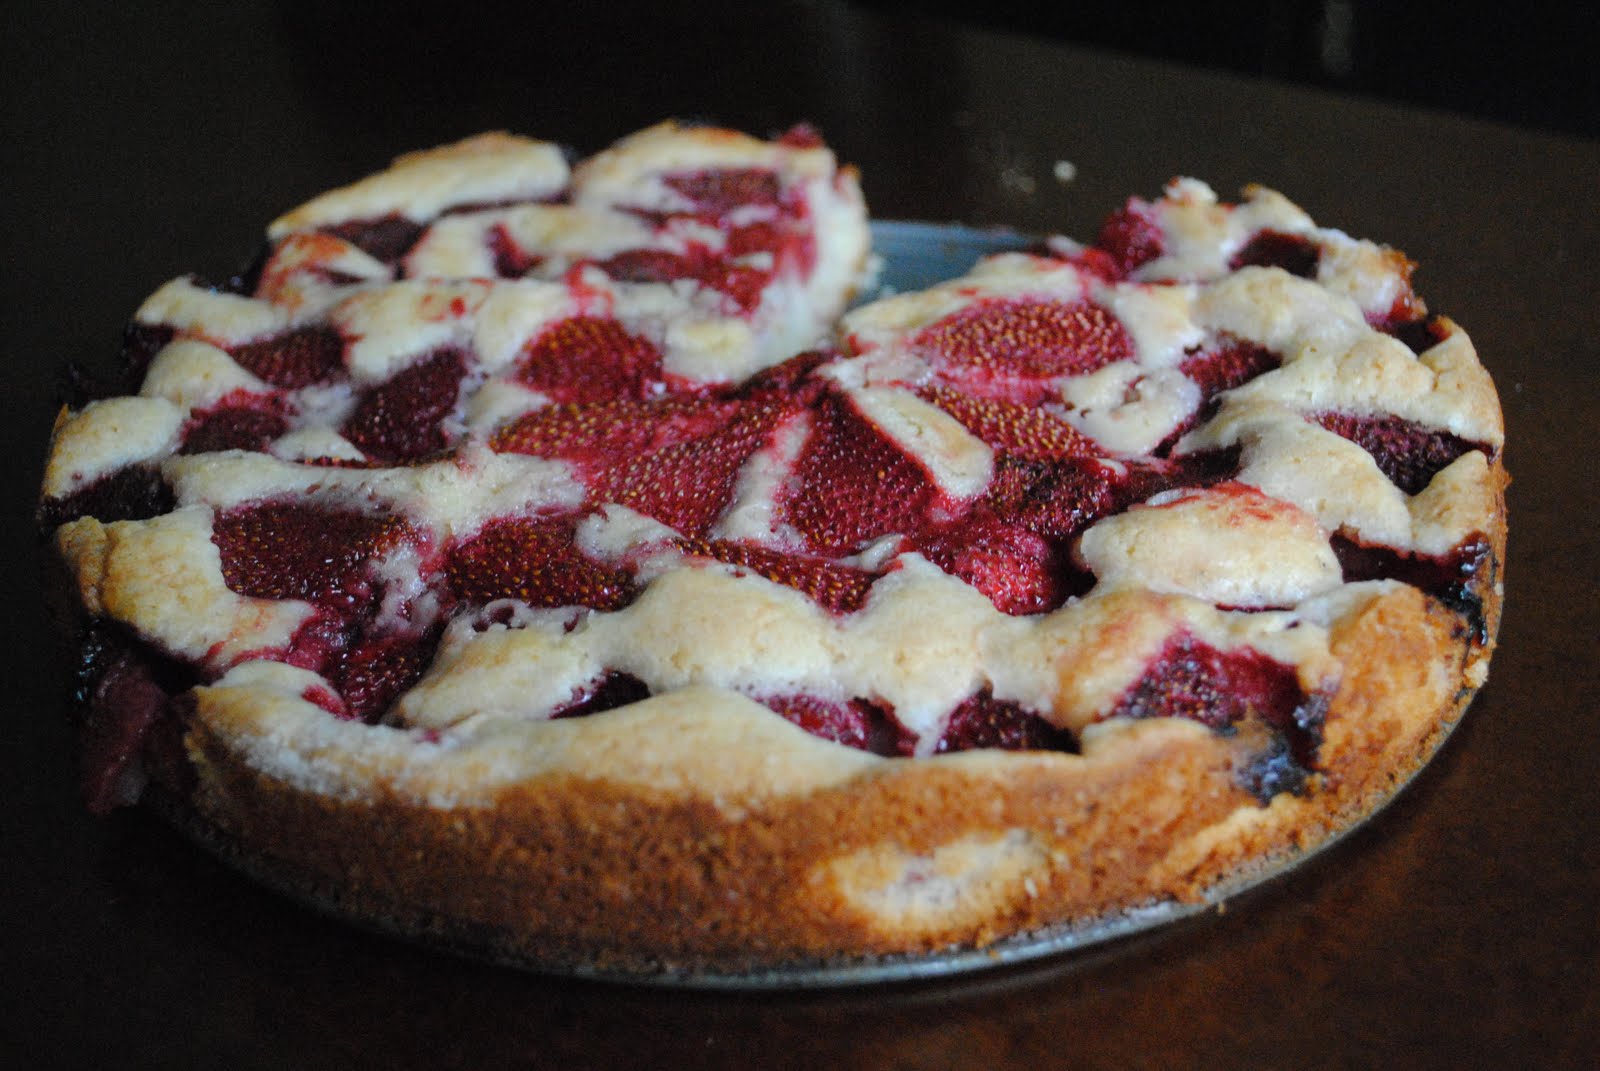 NJ Epicurean: Cailyn's (and Martha Stewart's) Strawberry Cake